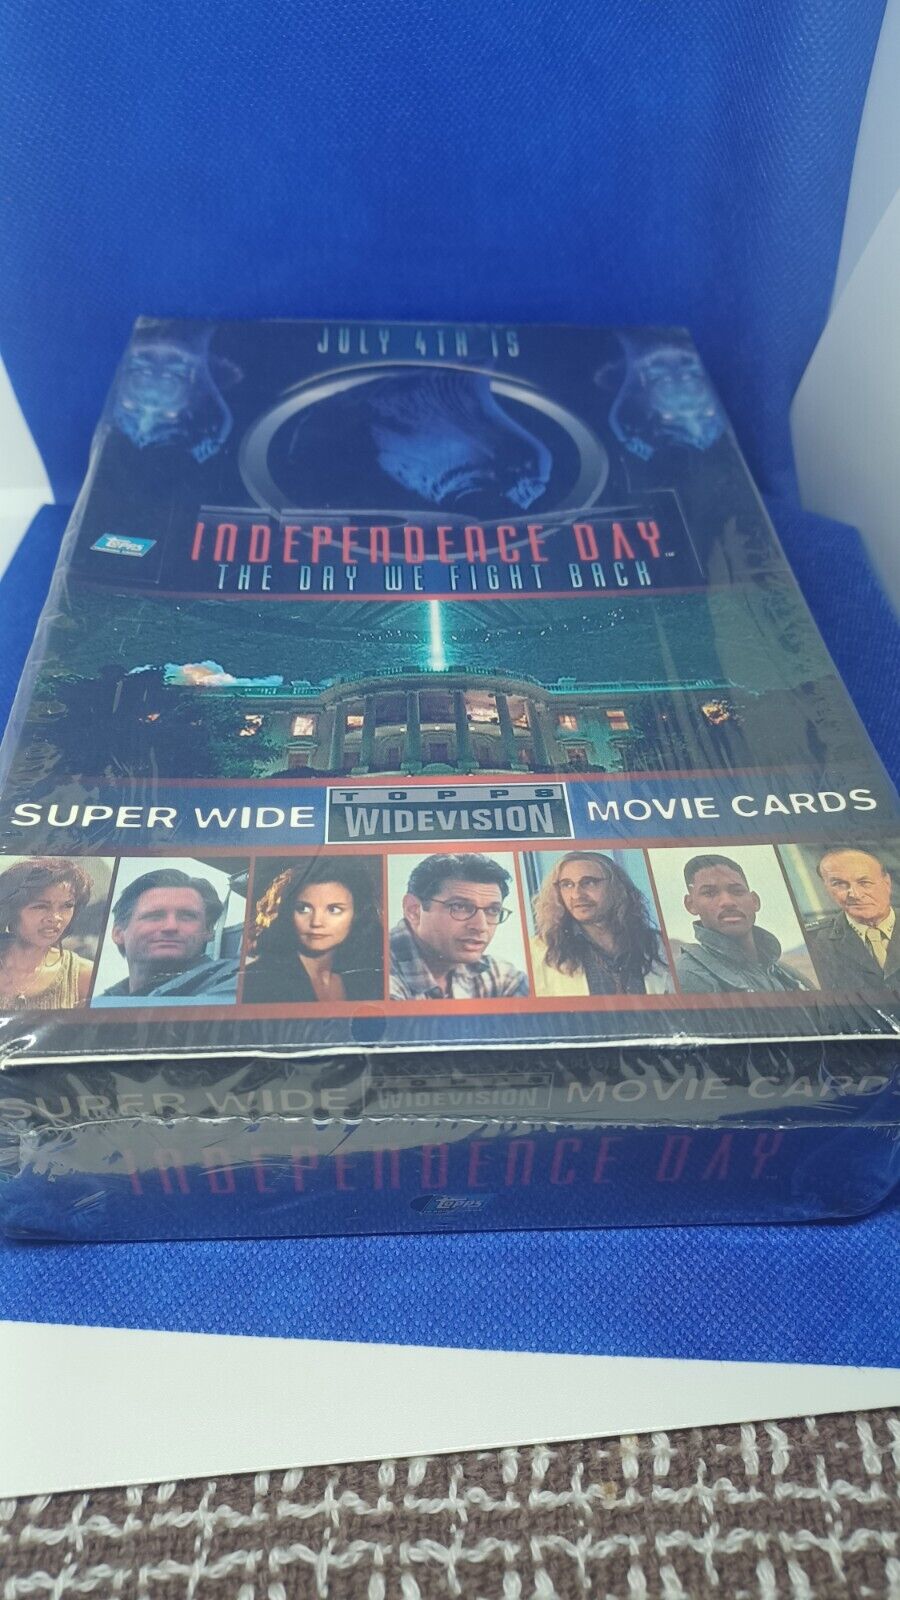 1996 TOPPS INDEPENDENCE DAY WIDE VISION PHOTO CARDS factory sealed box